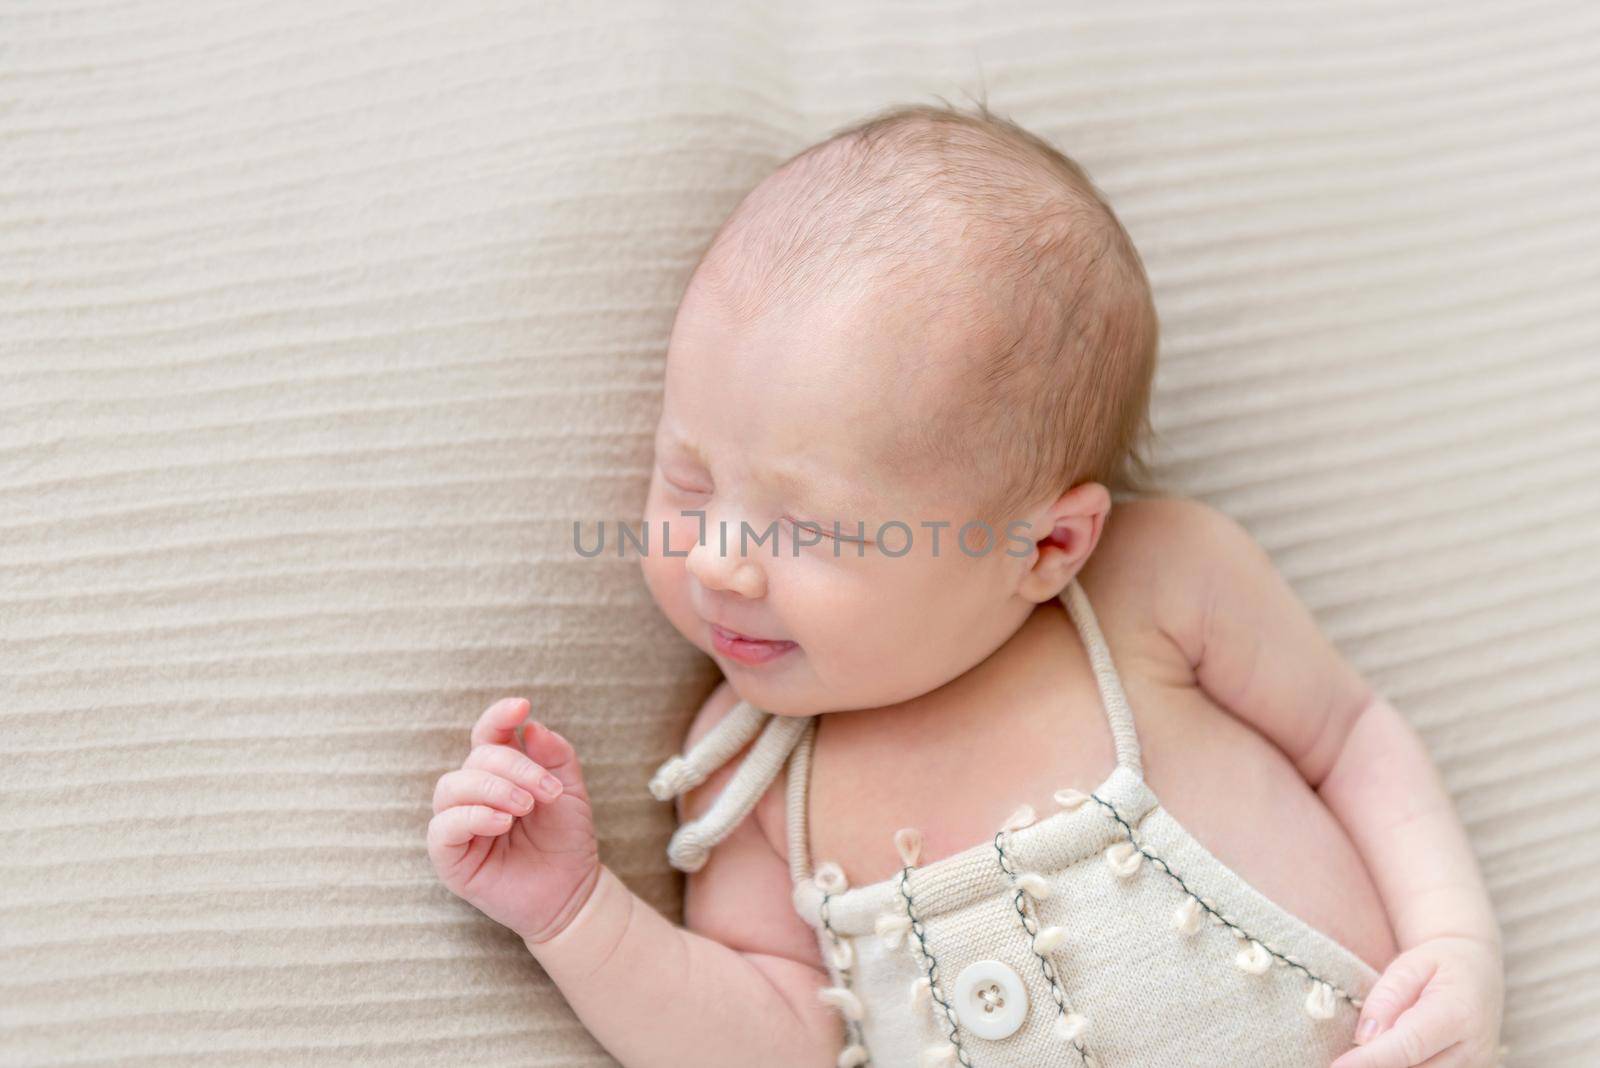 Lovely emotions of an infant in pastel colored costume sleeping on a soft blanket, closeup